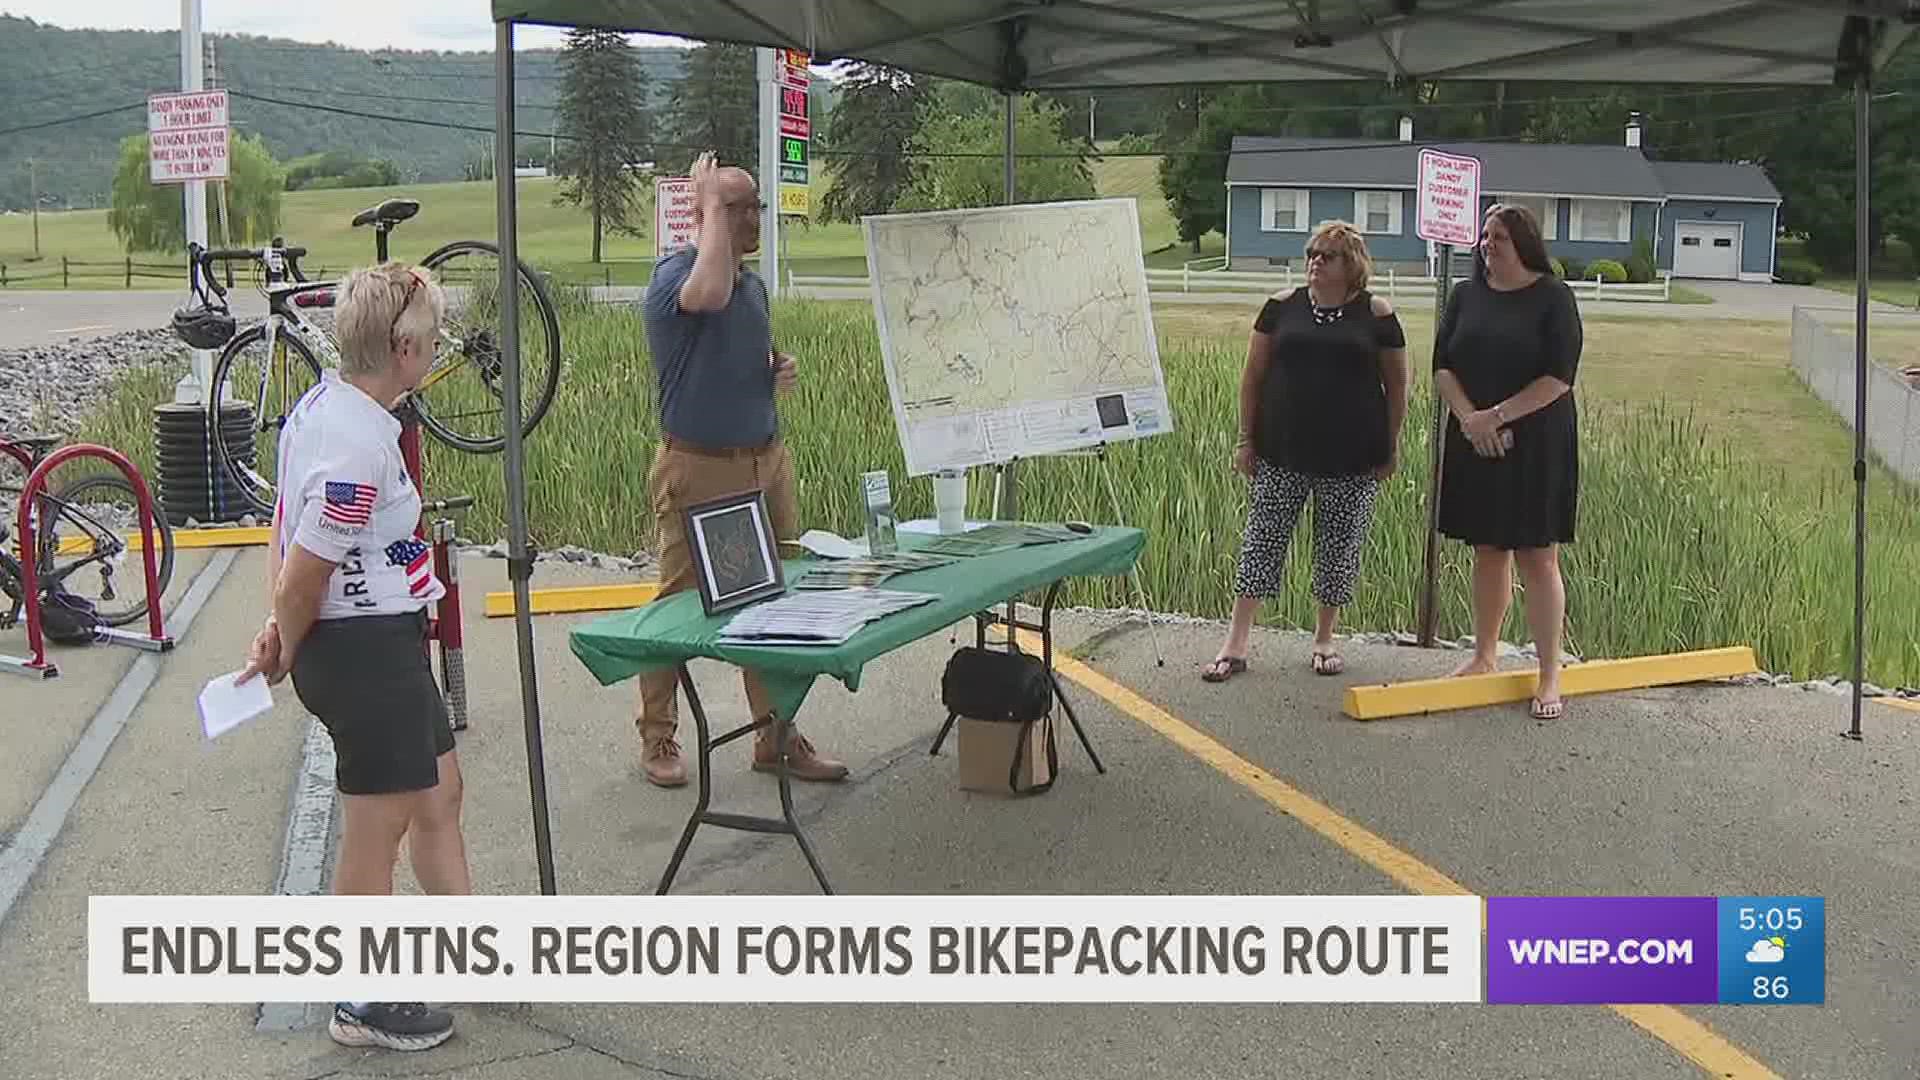 A 400-mile bikepacking loop in the northern tier of Pennsylvania is now ready for cyclists.